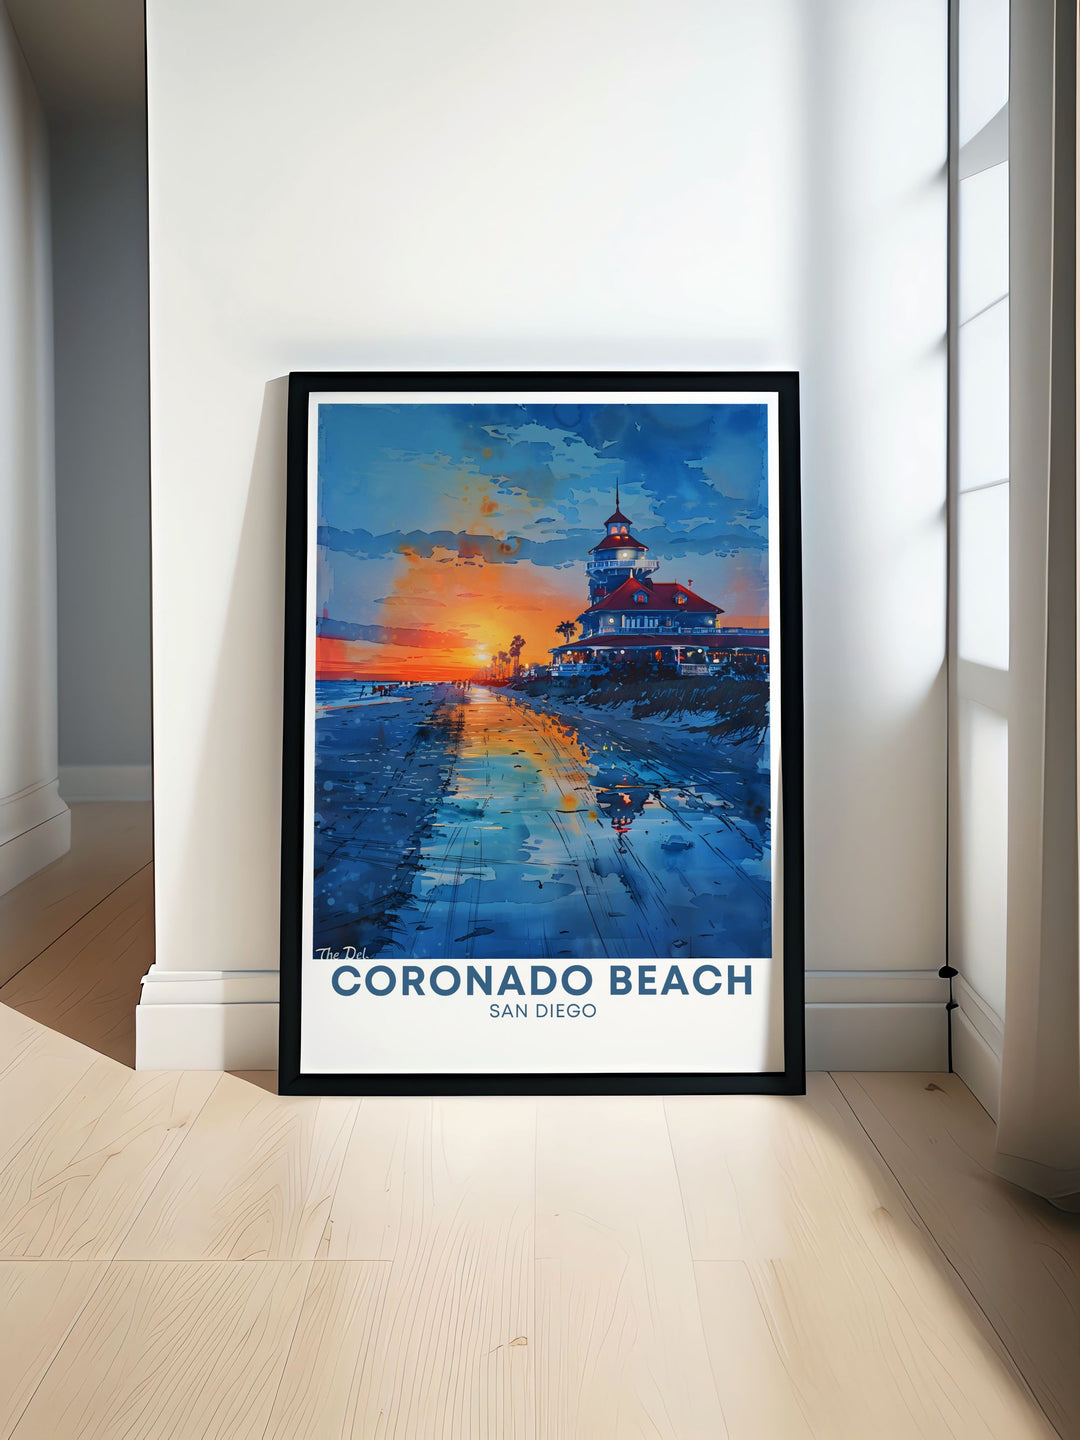 Stunning Colorado Art featuring Vail Ski and Hotel de Coronado. Perfect for adding a touch of elegance to any room this Colorado decor captures the beauty of the Rockies and the historical charm of Hotel de Coronado in vibrant detail.